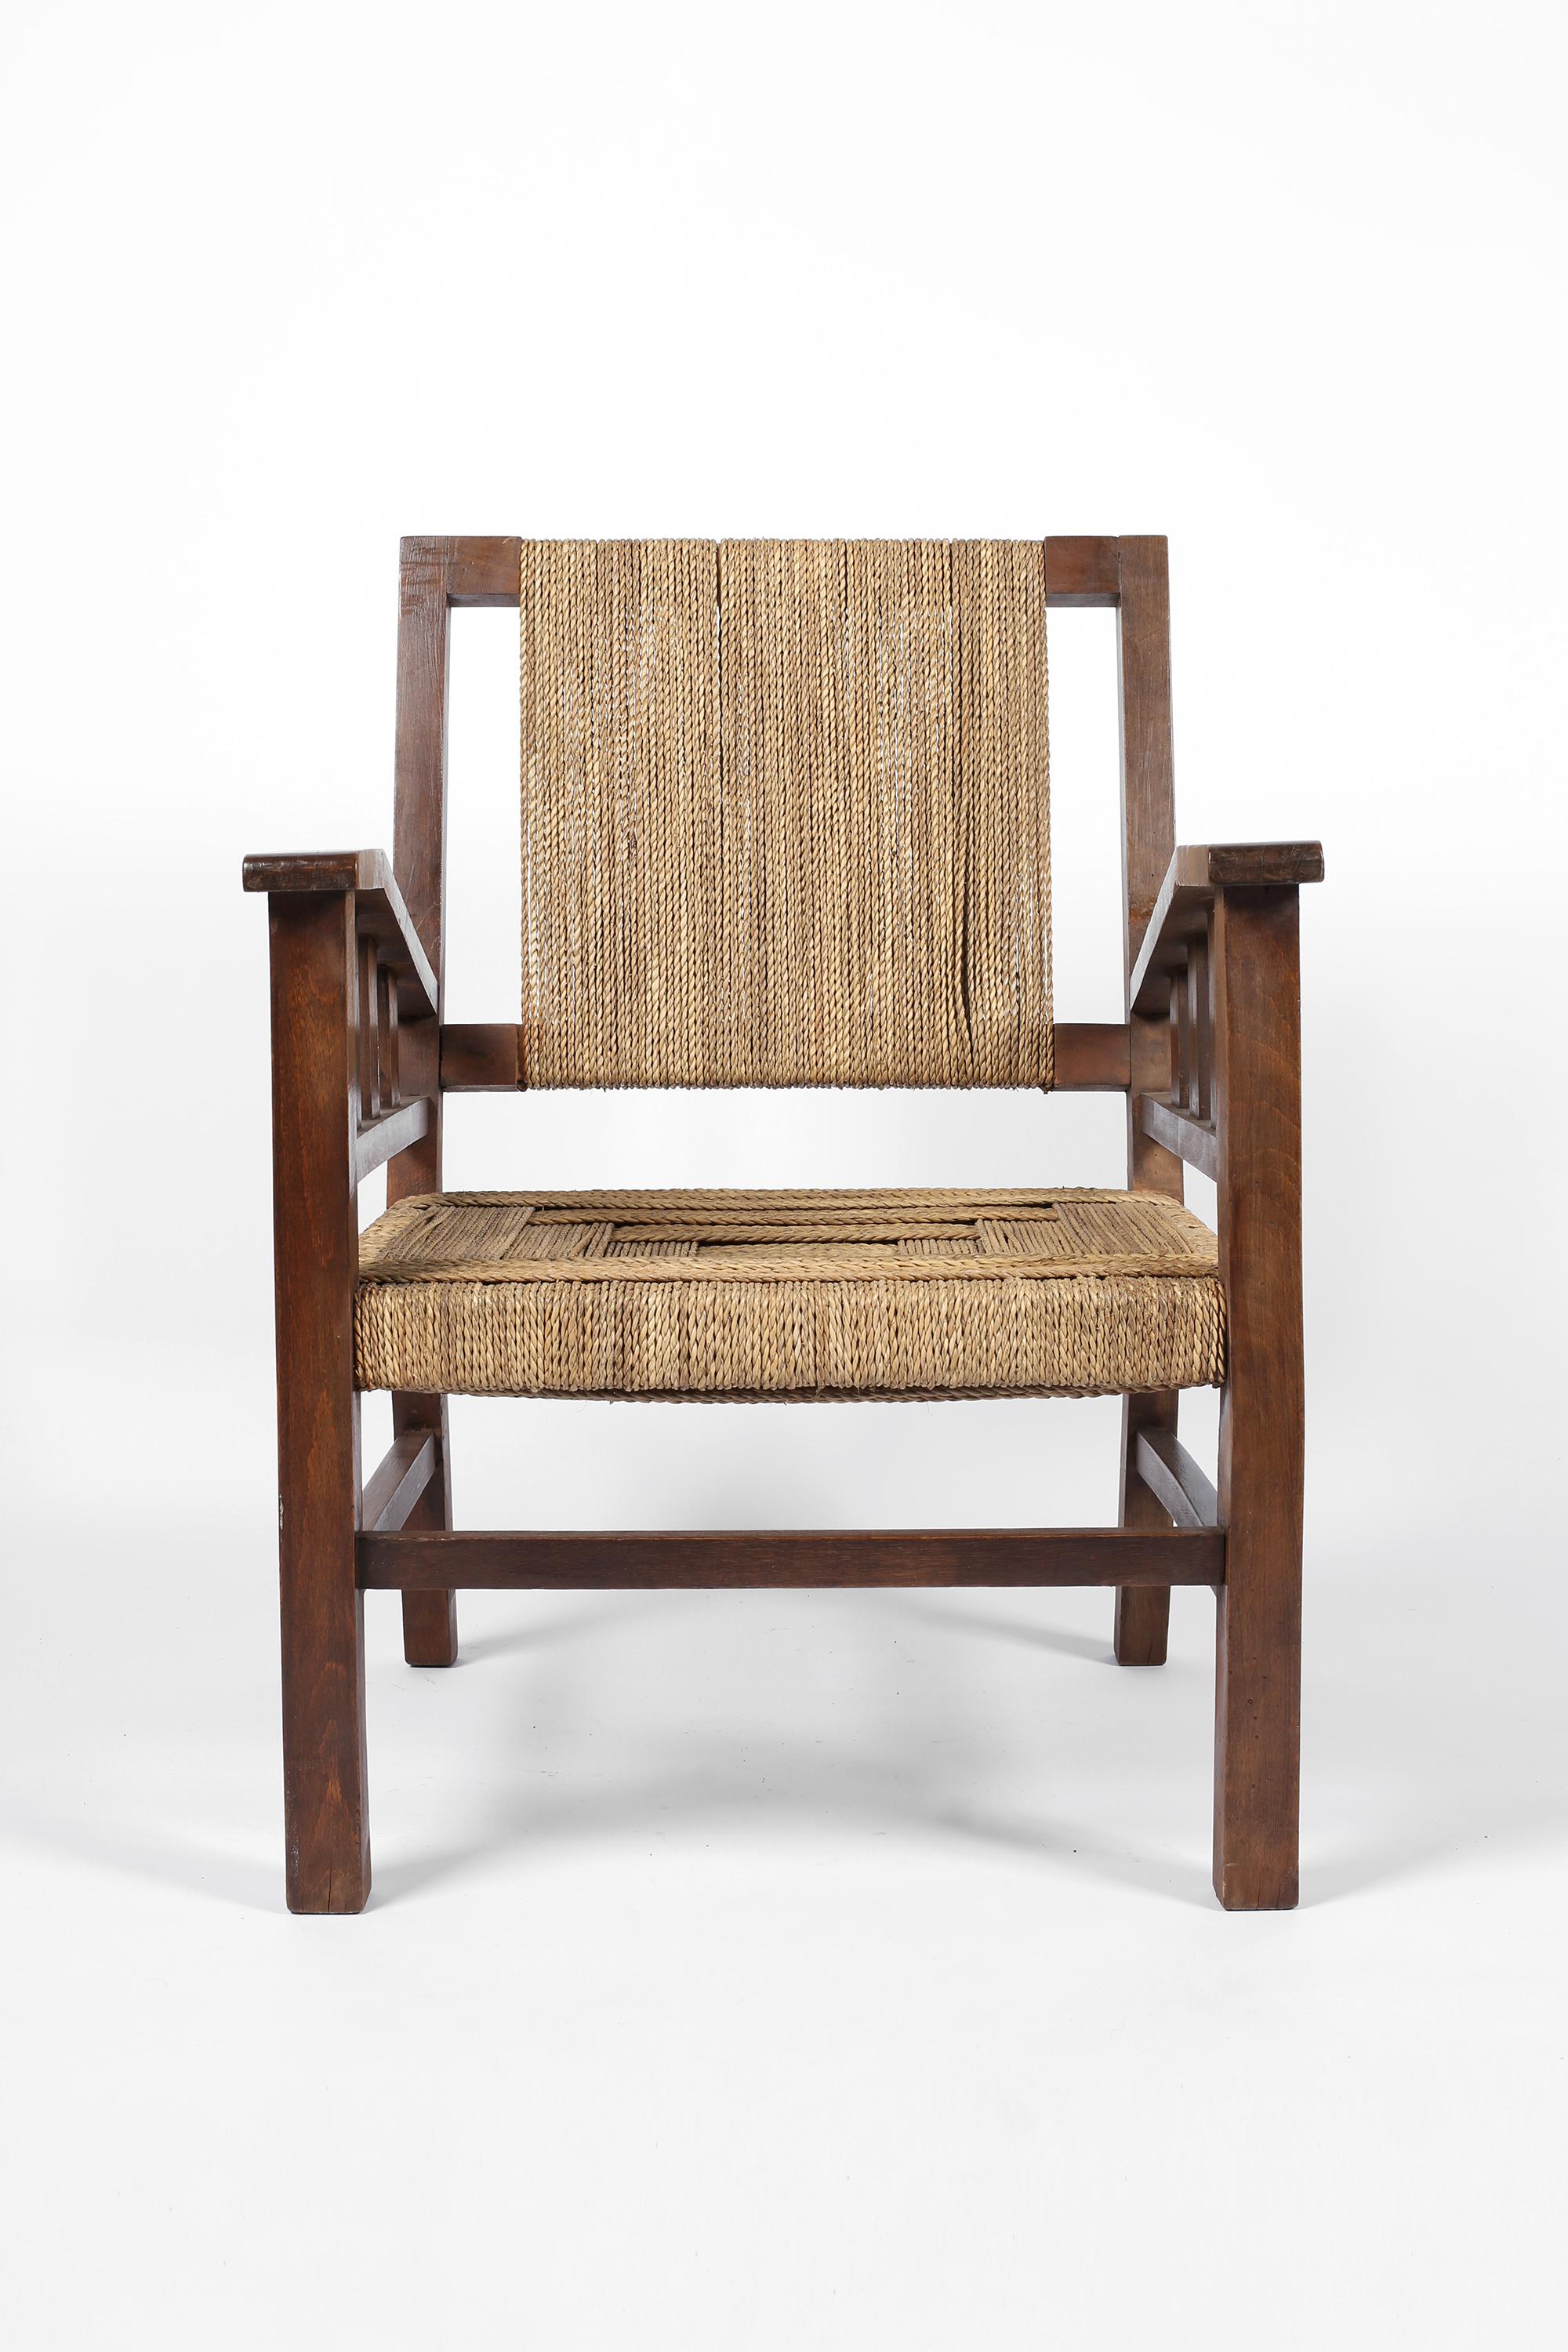 A pair of stained beech and woven seagrass armchair by Francis Jourdain. French, c. 1930.

Francis Jourdain (1876-1958) - Born in Paris and son of famous Belgian architect Frantz Jourdain. Primarily a painter, but also an interior designer,